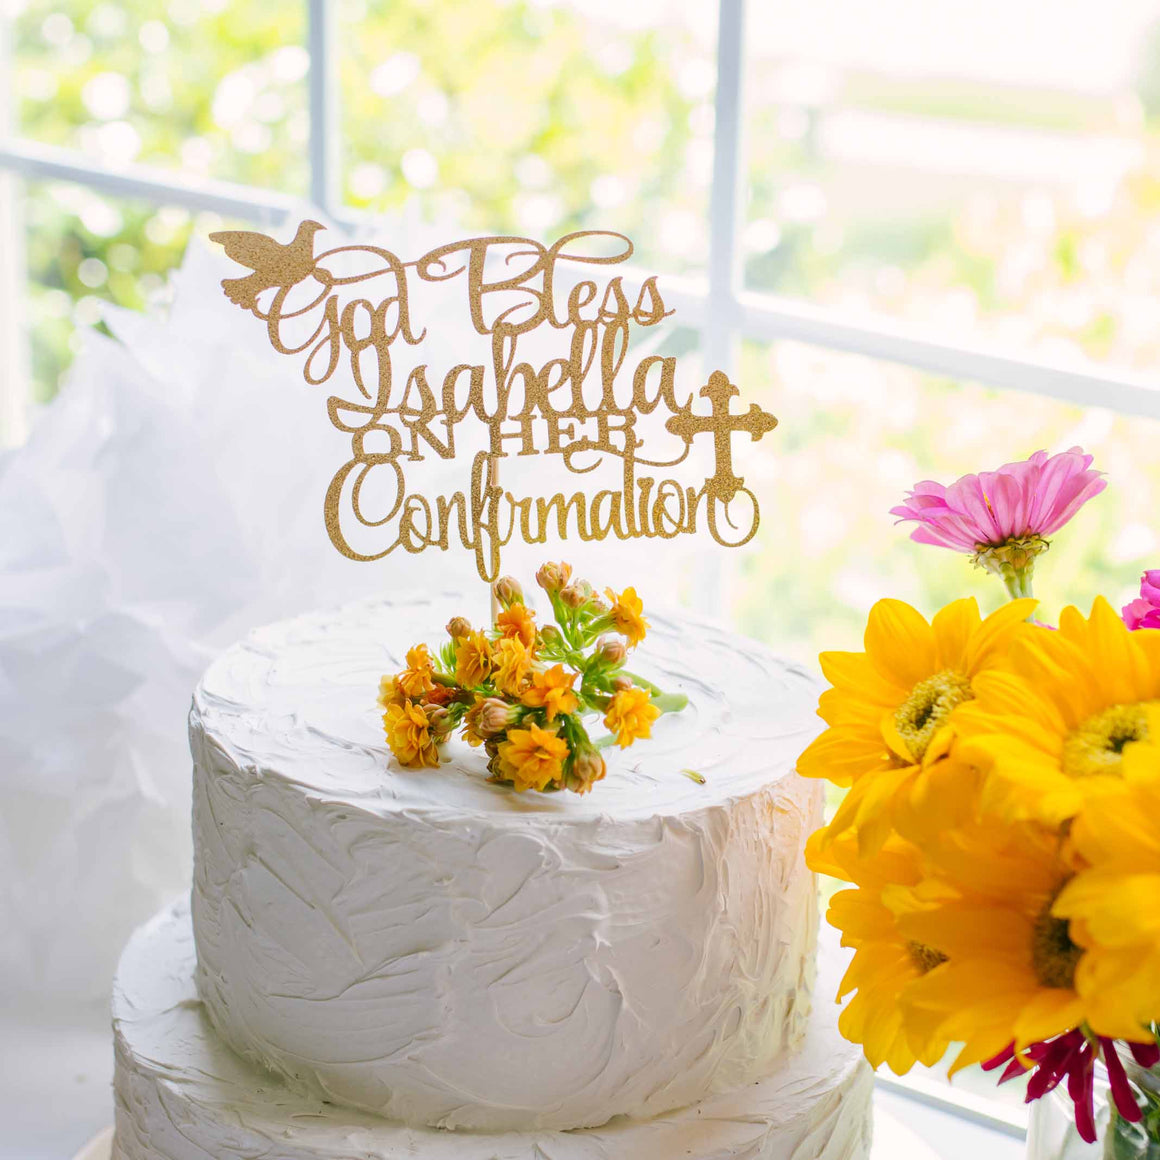 God Bless Cake Topper for Confirmation or Communion with dove and cross